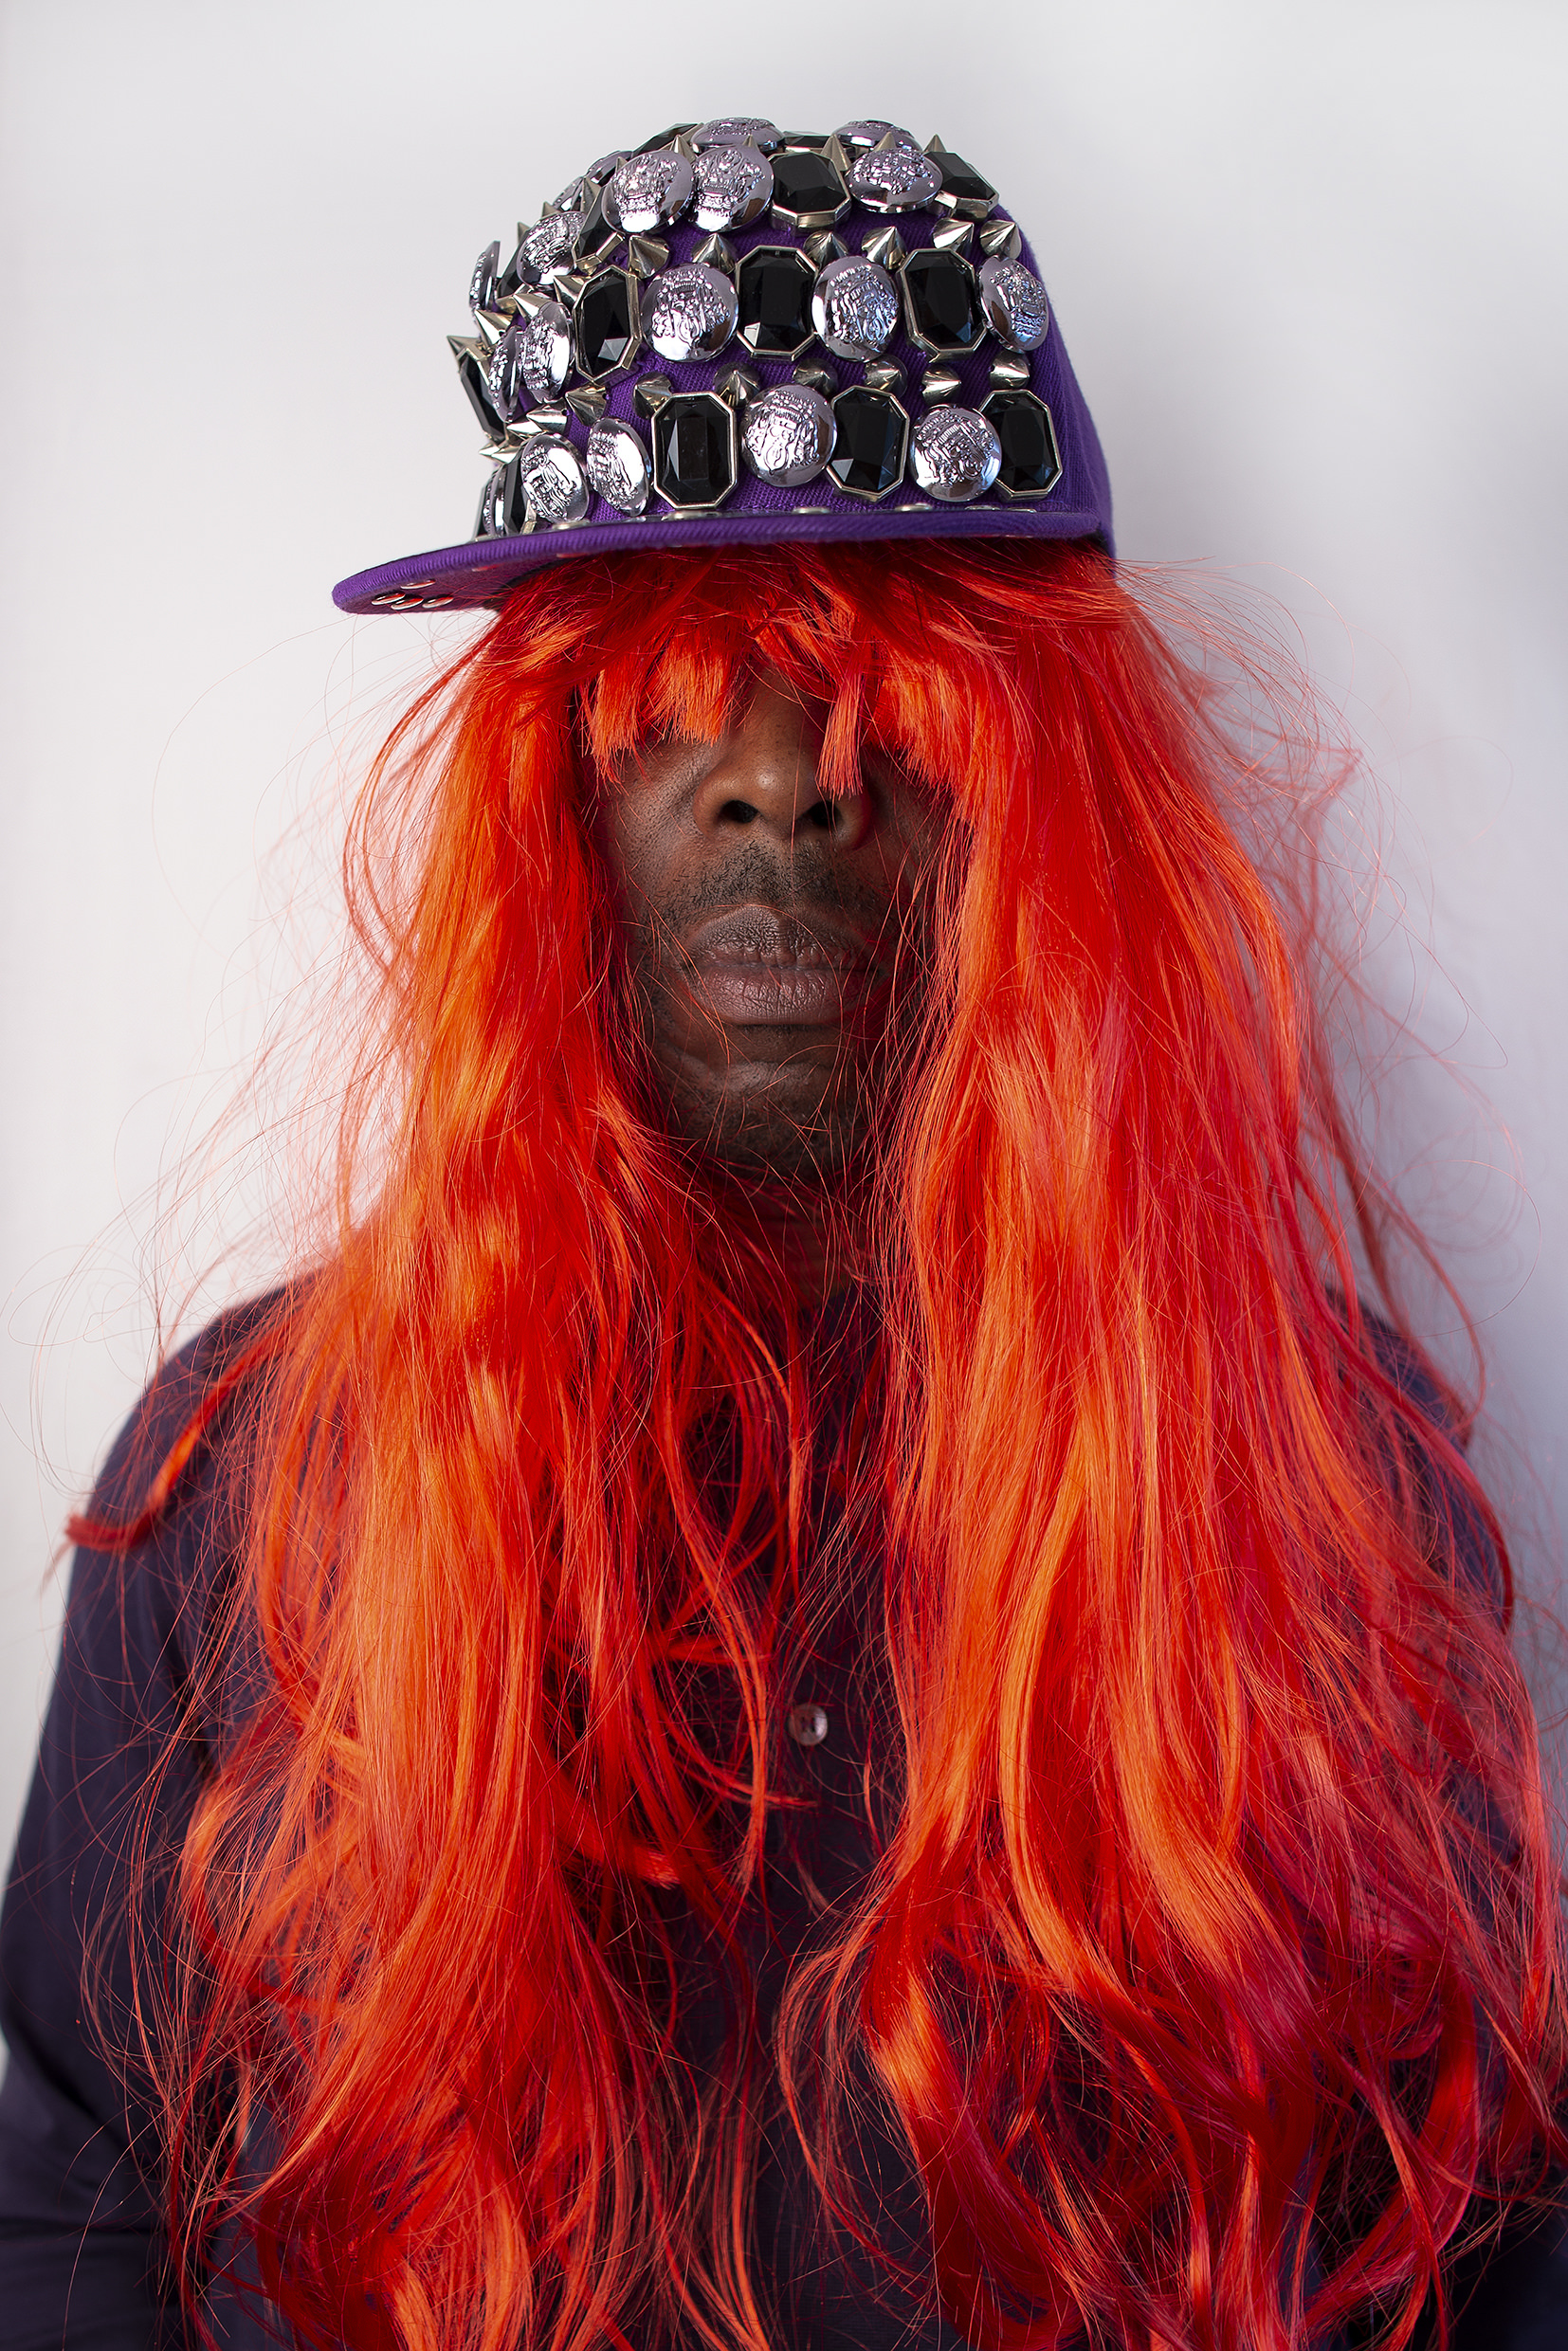 A black man wearing a long red wig and jewel covered baseball cap